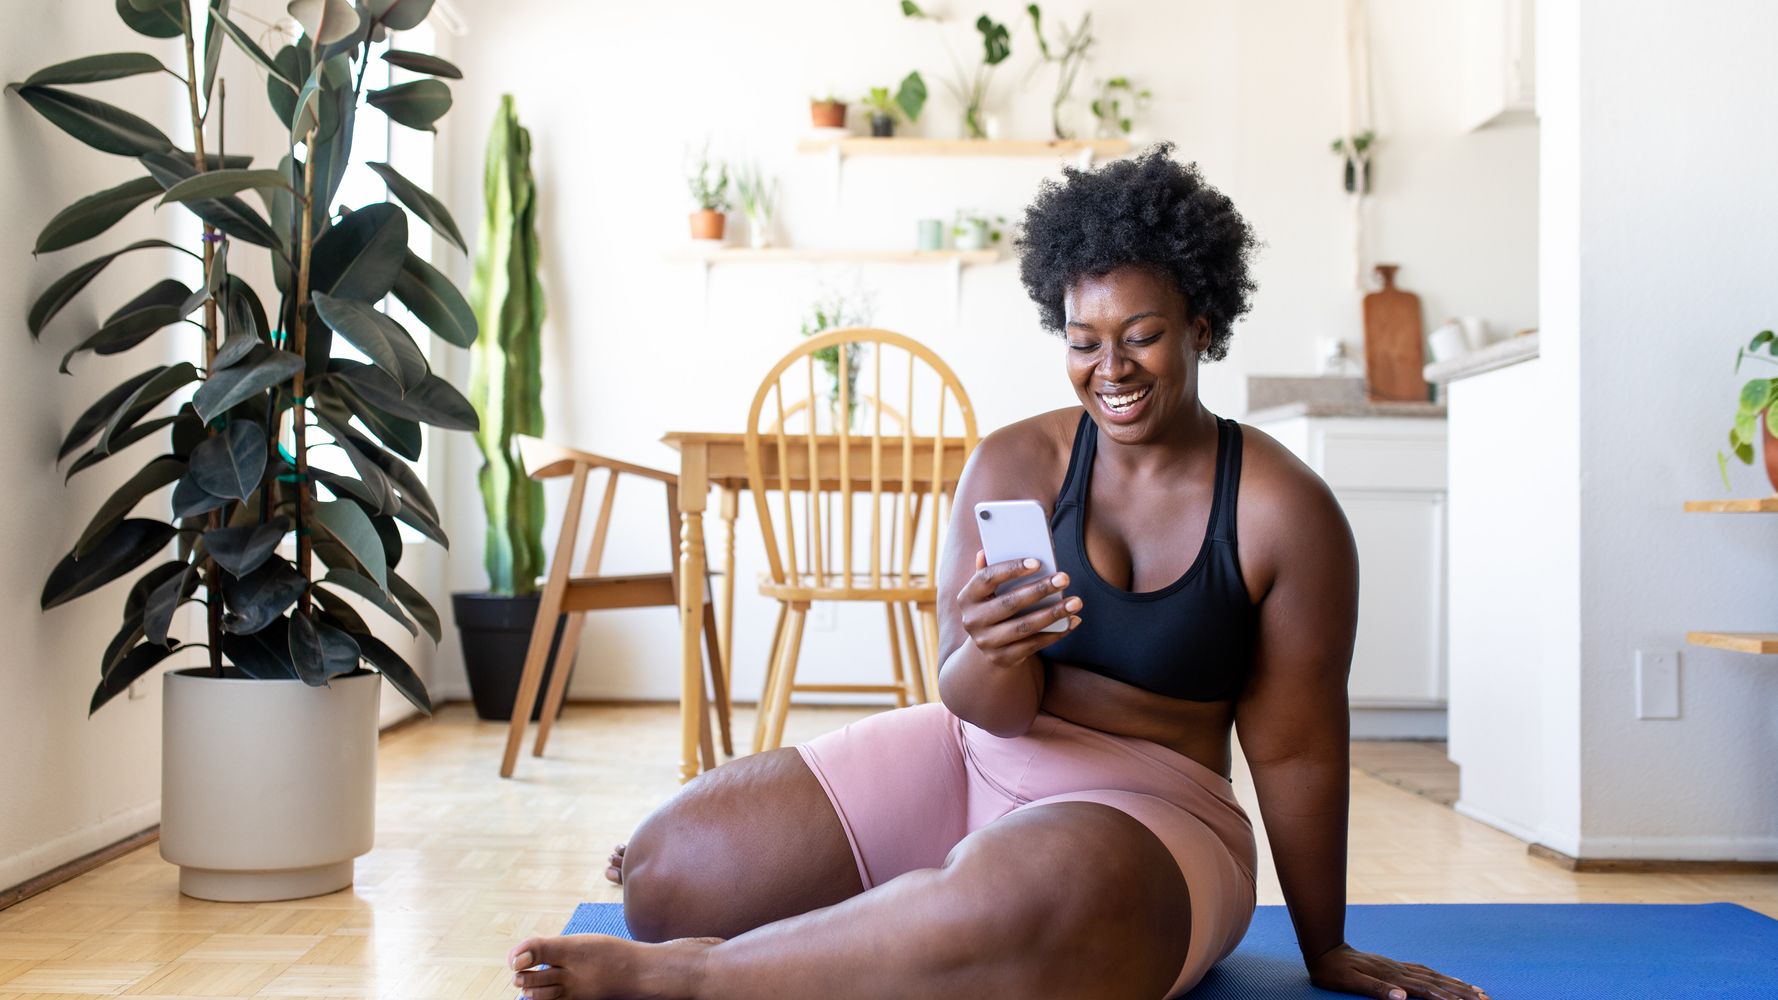 8 Body-Constructive Fitness Apps That Will Give You A Very good Workout